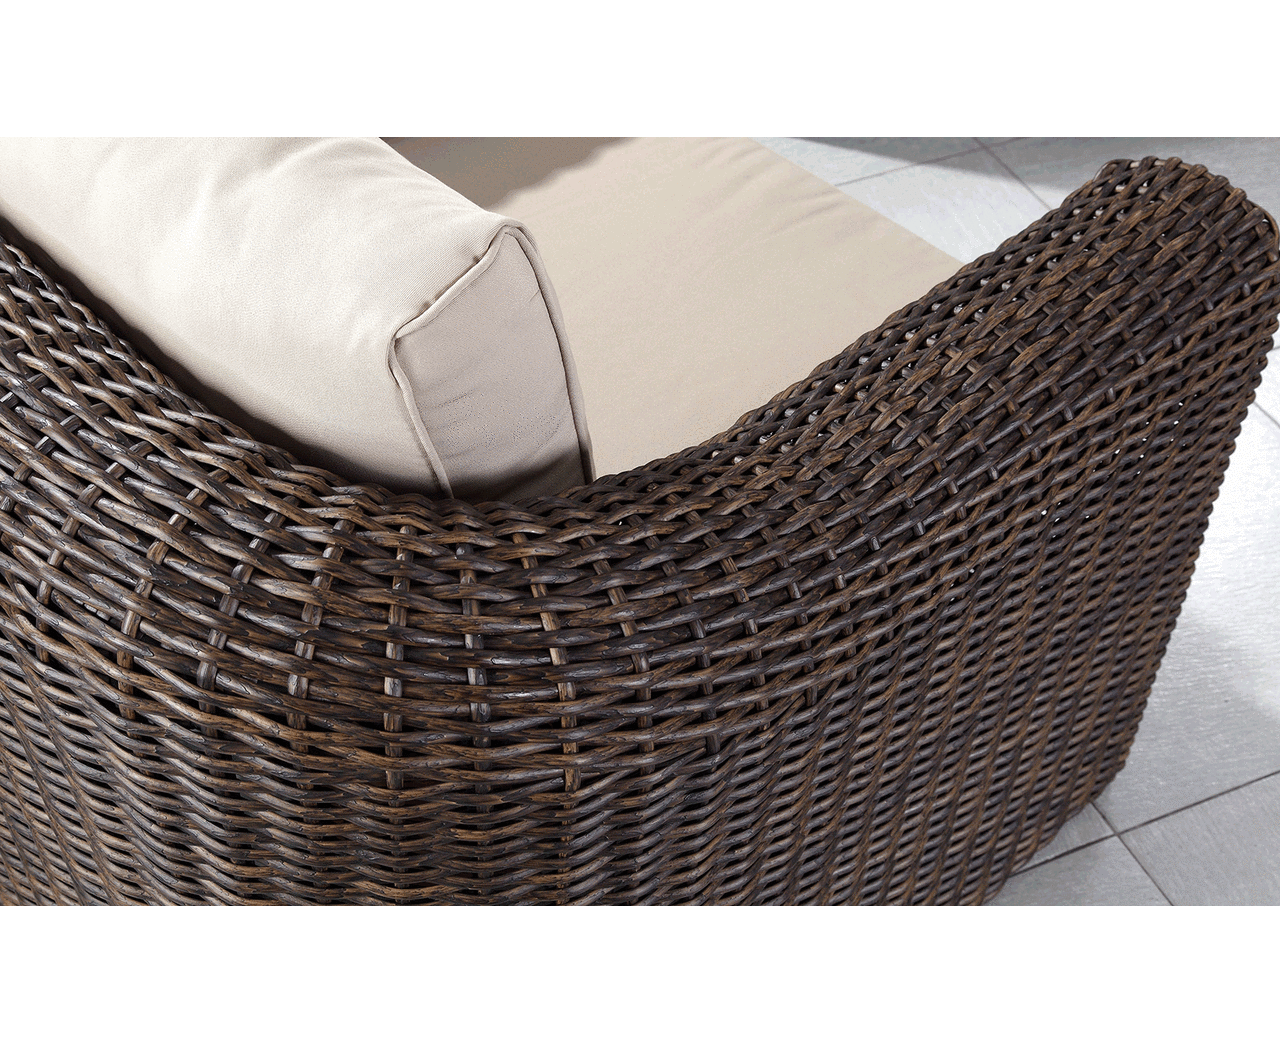 Outdoor Subiaco 3+2+1 Seater Outdoor Wicker Lounge Setting With Coffee Table - Outdoor Wicker Lounges - Chestnut Brown/Latte cushion